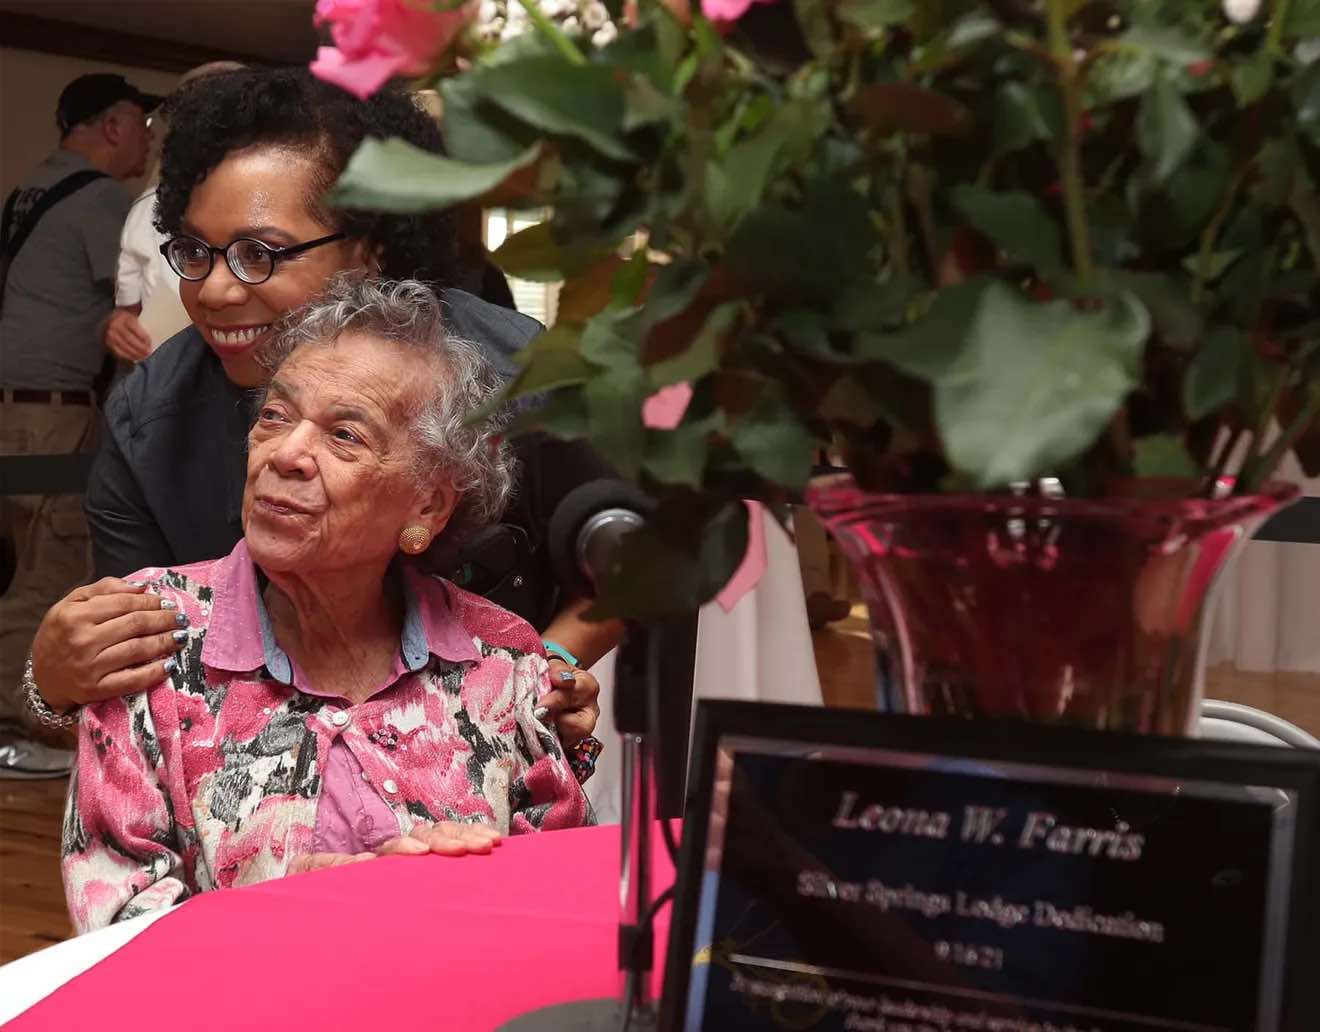 Leona Farris, 104, poses for a photograph with her daughter Laura Farris-Daugherty, before the city of Stow's dedication ceremony on September 16, to rename Silver Springs Lodge as the Leona Farris Lodge. Farris is being honored for her groundbreaking work throughout Stow's history — courtesy of Karen Schiely, Akron Beacon Journal.